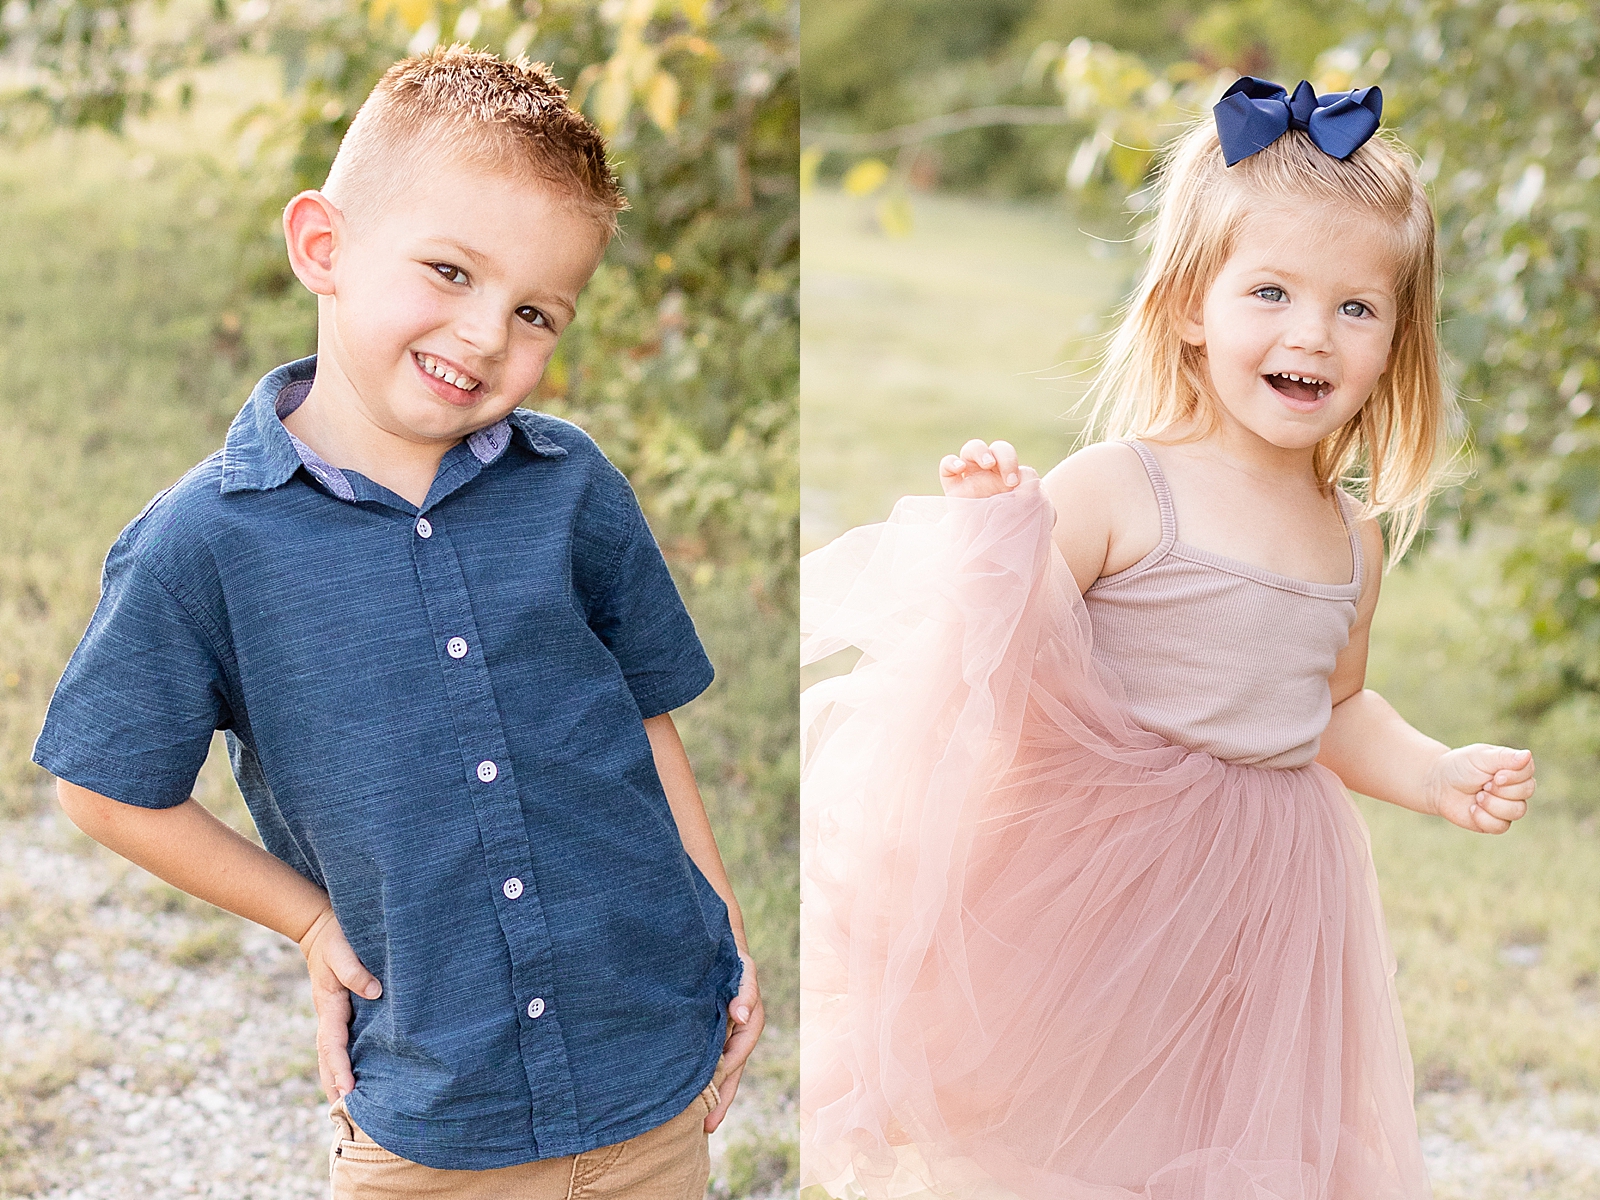 little boy smiles at the camera striking a pose with his hand on his hip while his sister smiles big at the camera holding up her pink tutu dress during their family session at the park